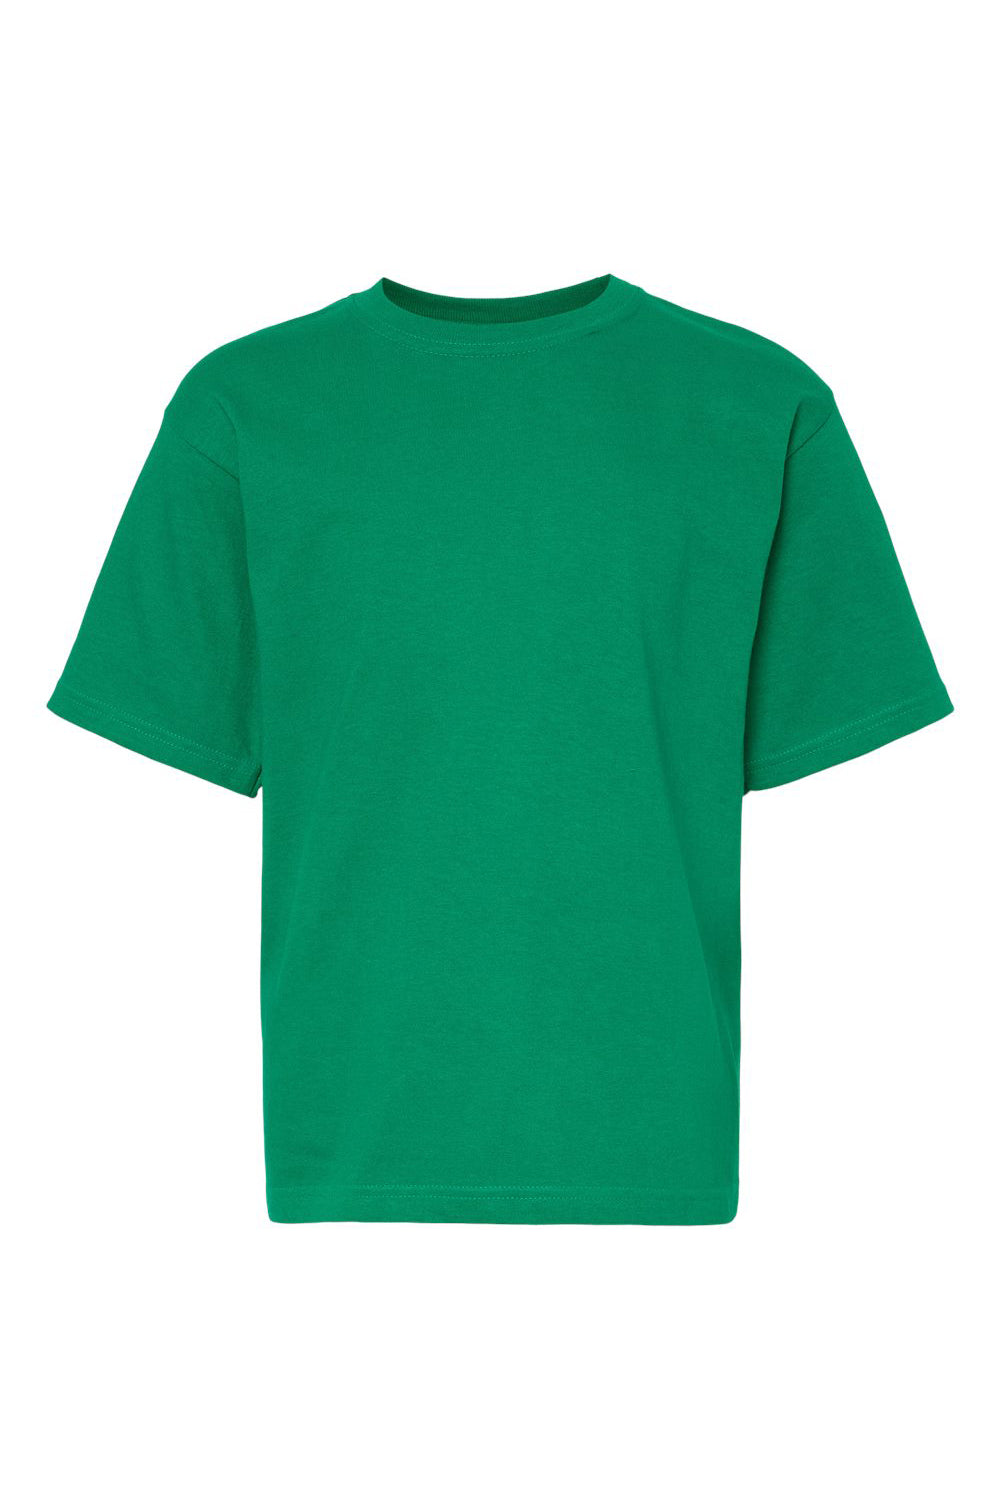 M&O 4850 Youth Gold Soft Touch Short Sleeve Crewneck T-Shirt Fine Kelly Green Flat Front